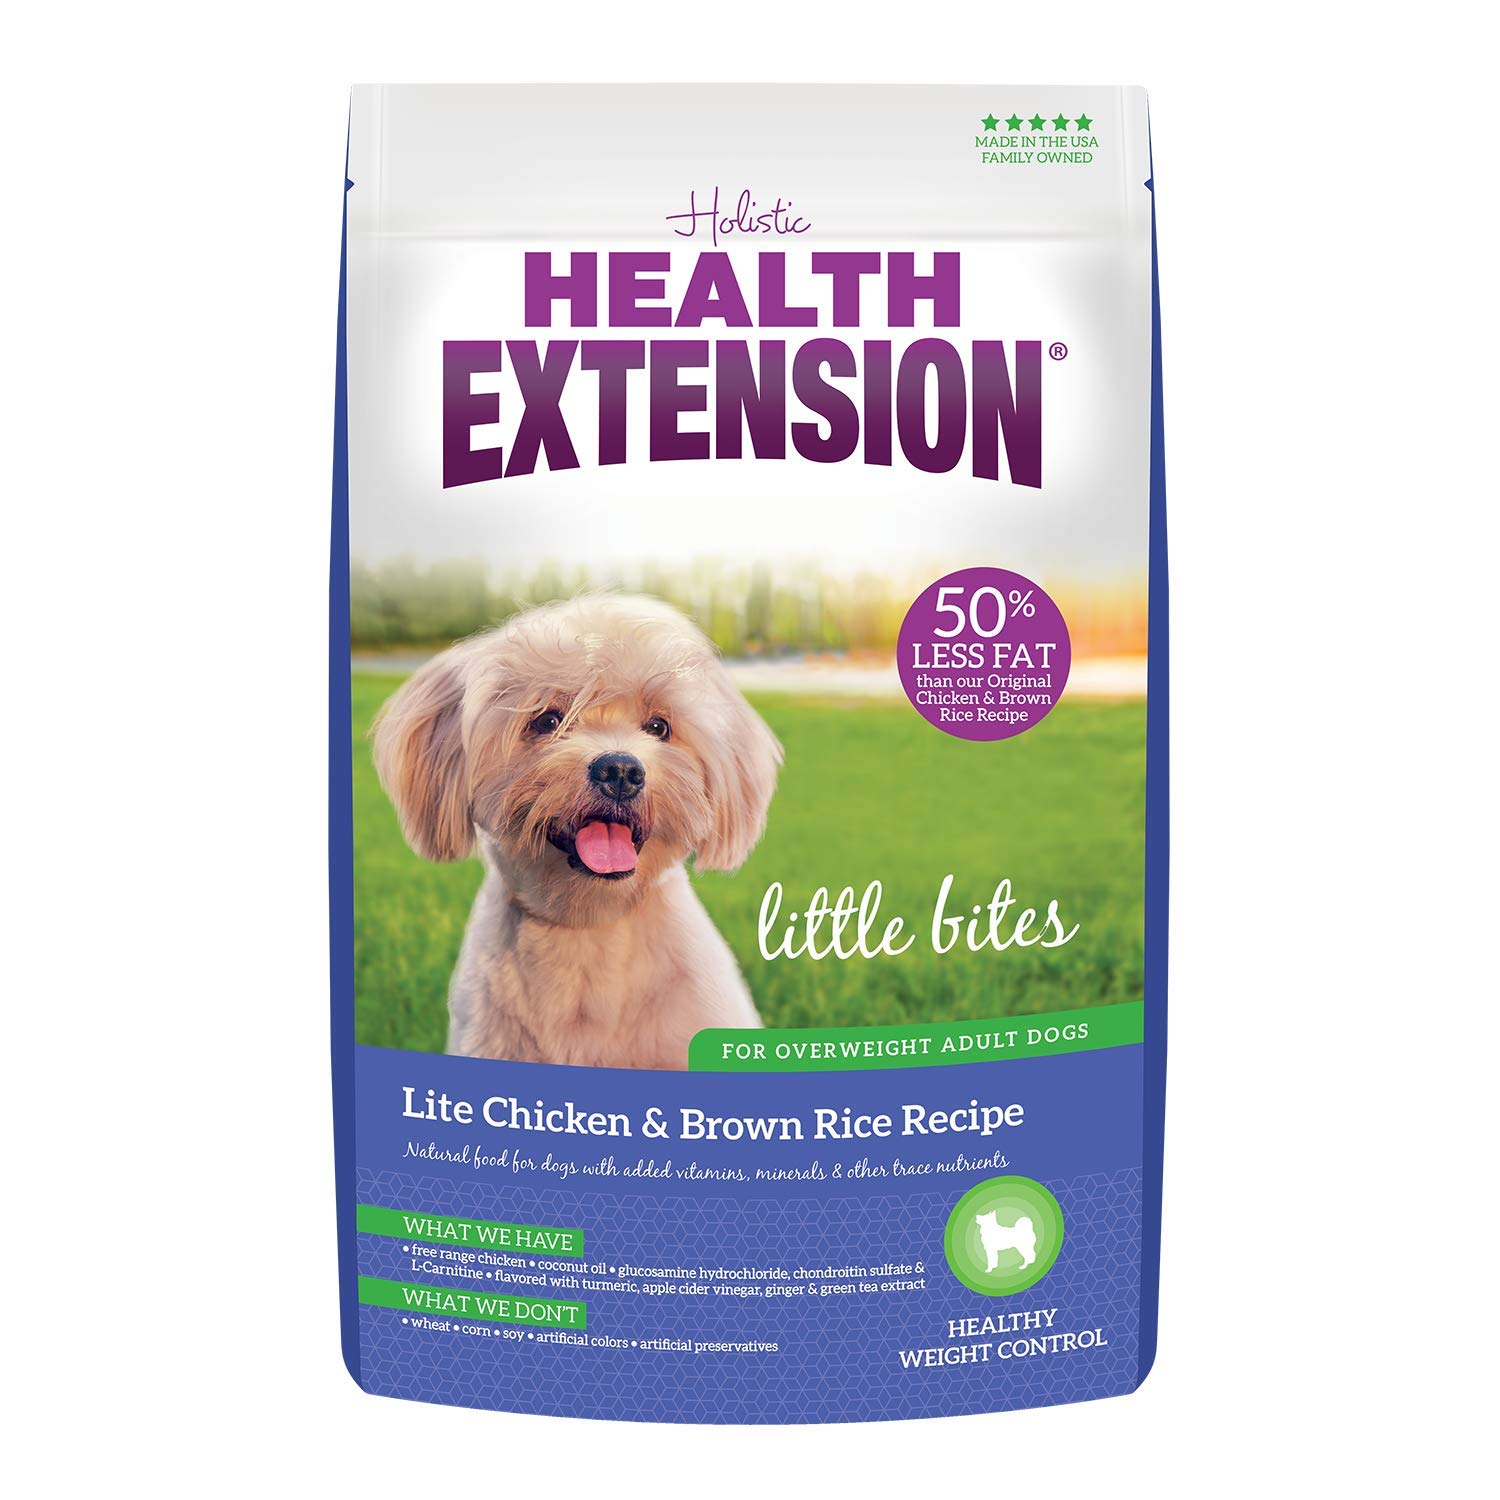 Health extension 